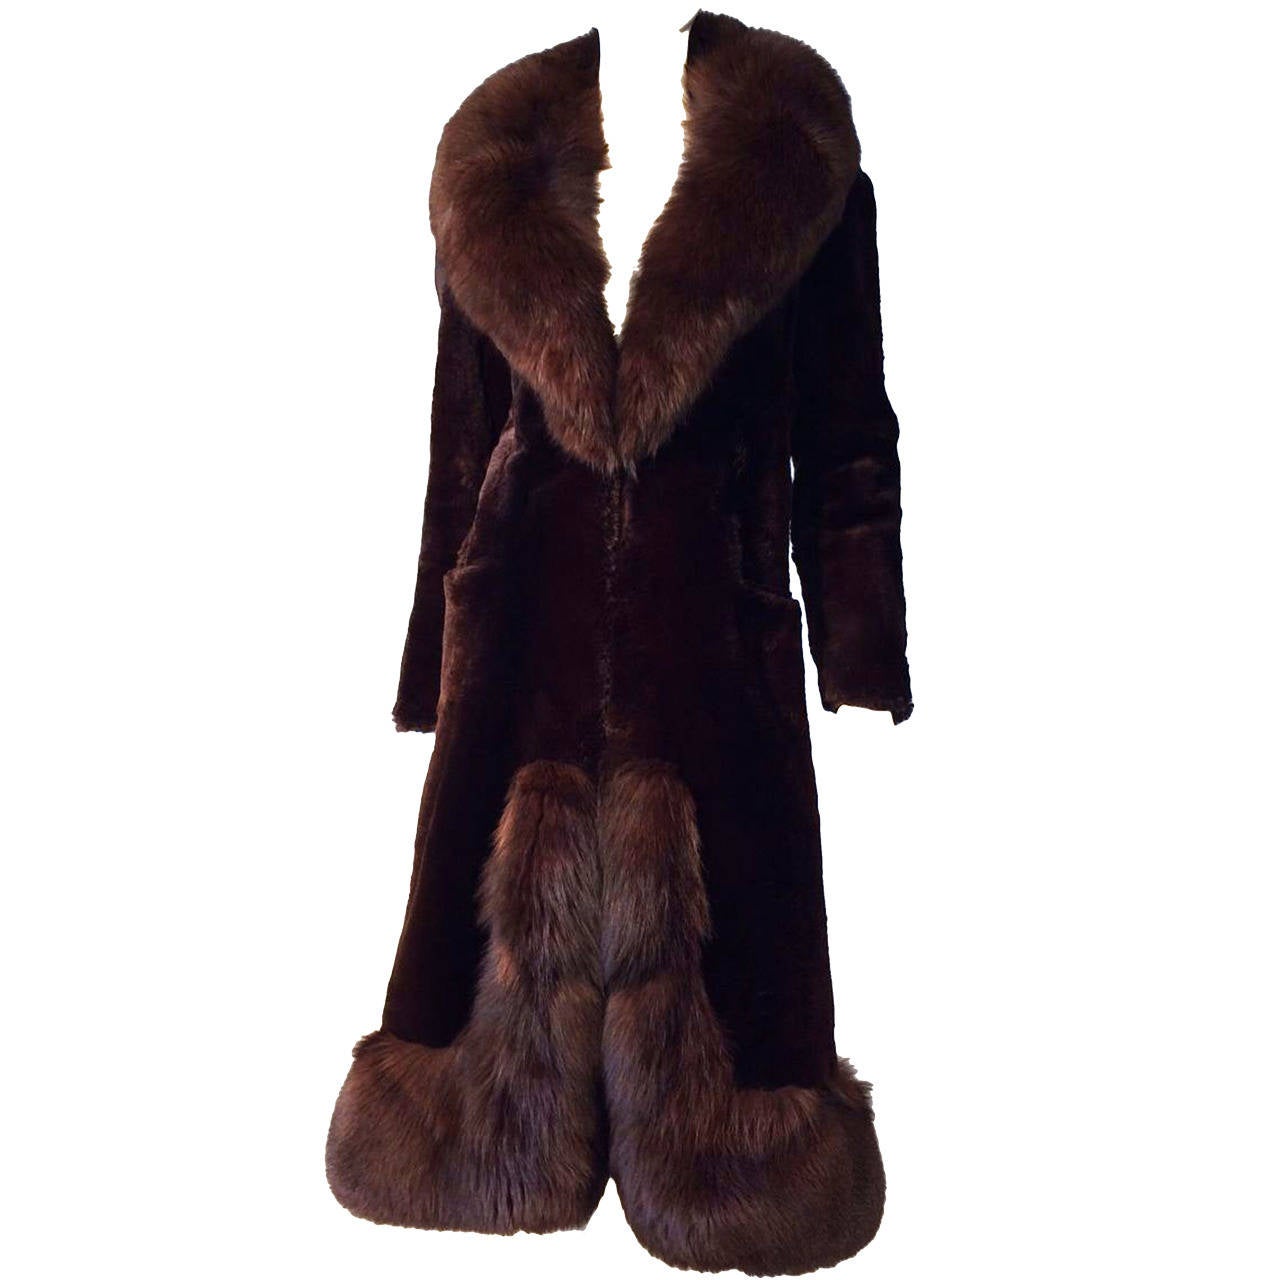 Christian Dior Couture Sheared Beaver and Fox Fur Coat 1960s For Sale